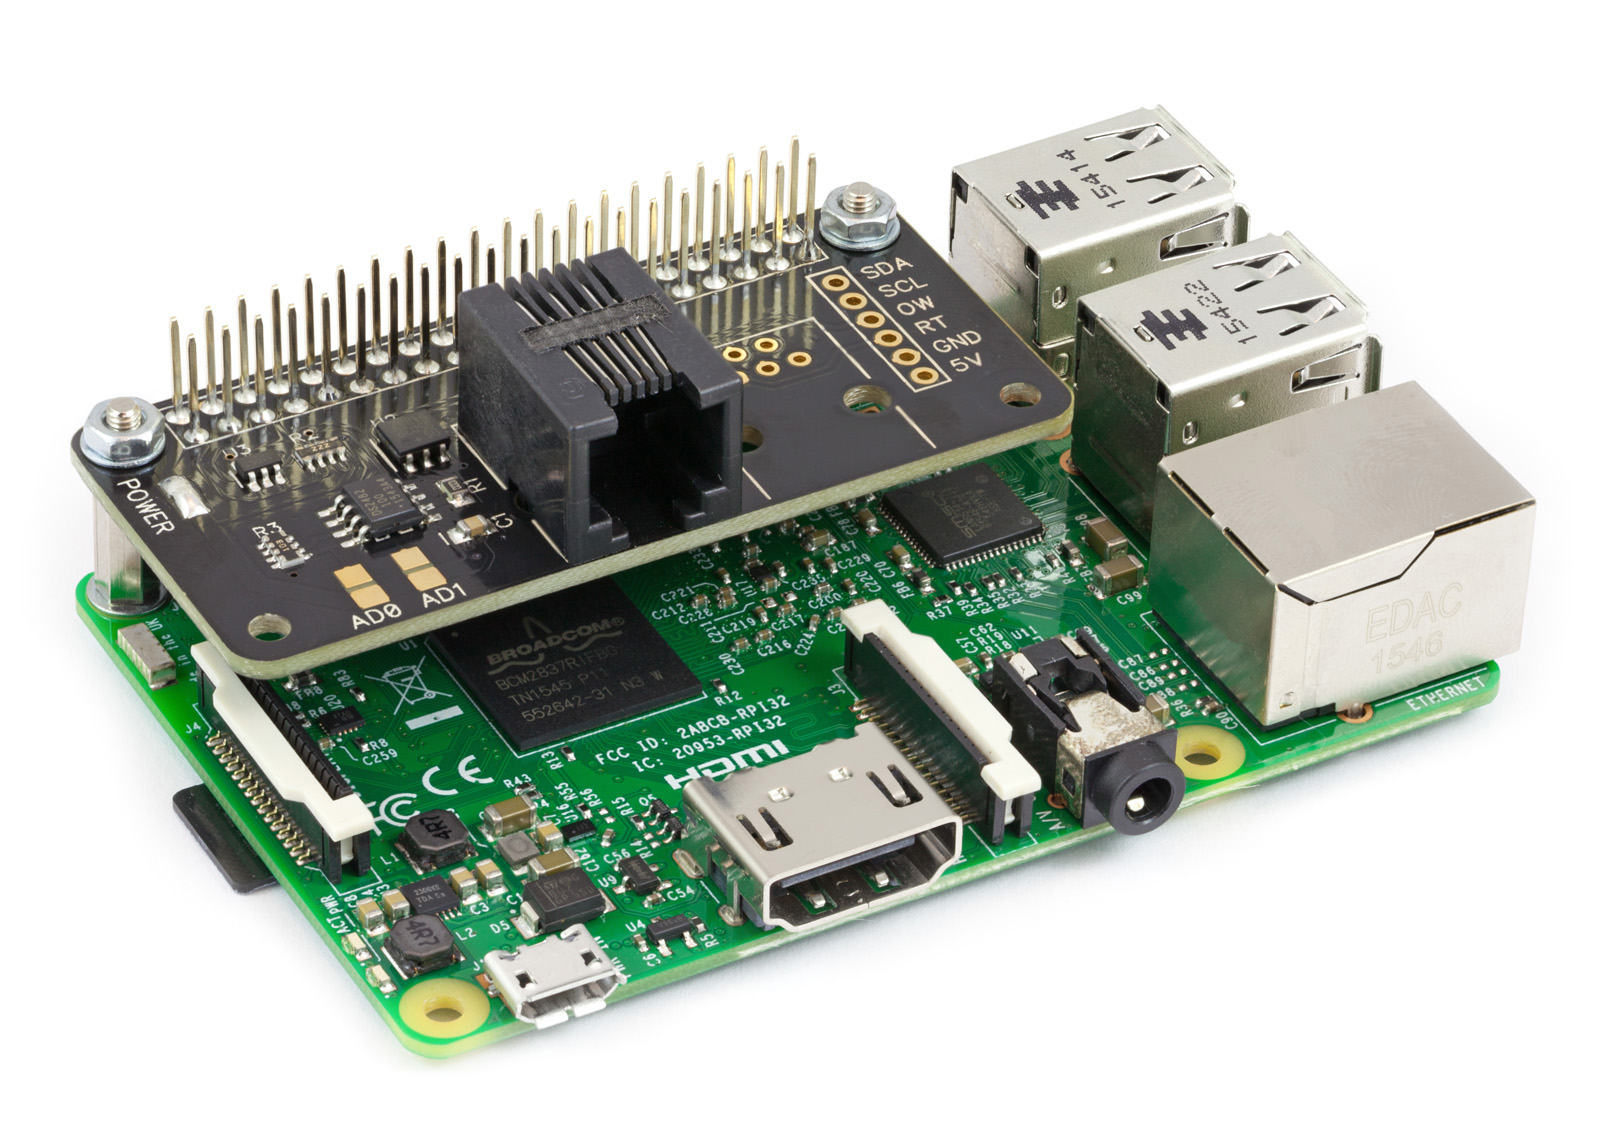 Installed on a Raspberry Pi with optional mounting kits